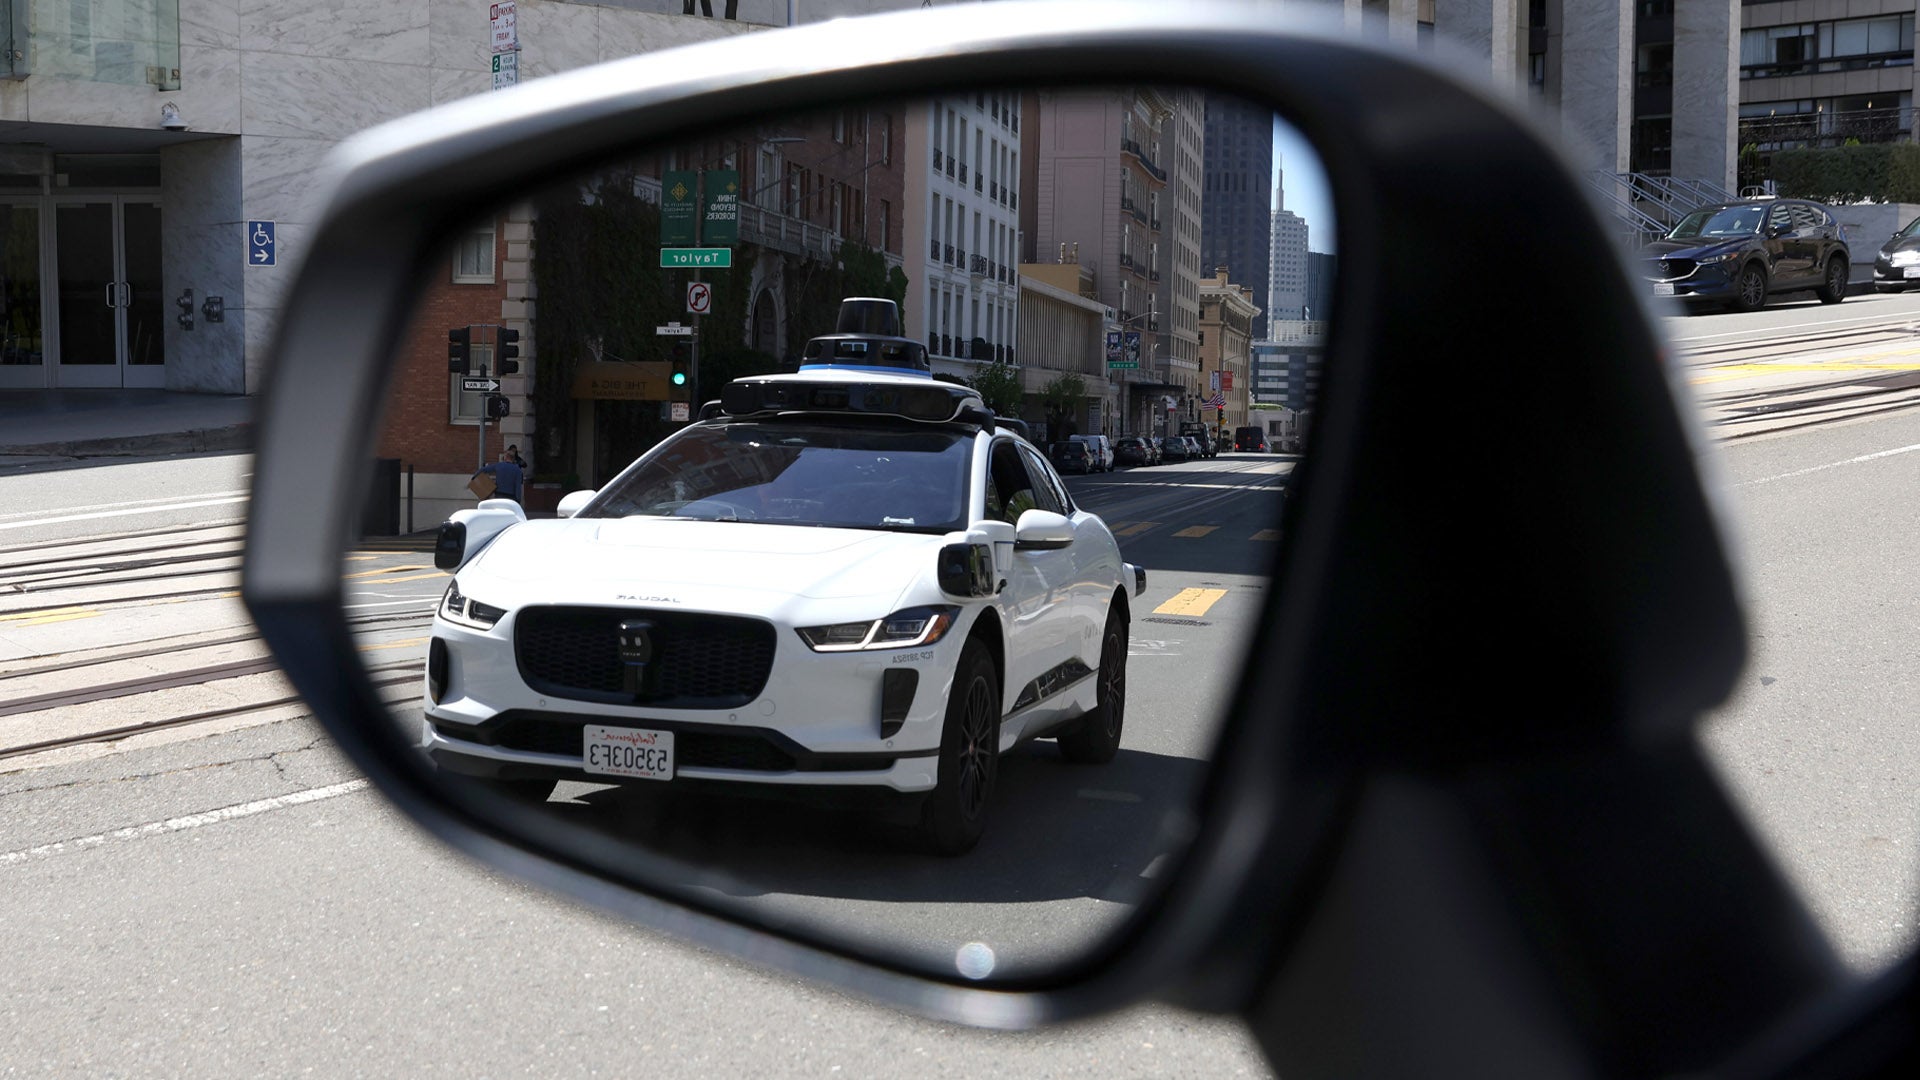 Most Americans Say They’re ‘Afraid’ of Self-Driving Cars: Report